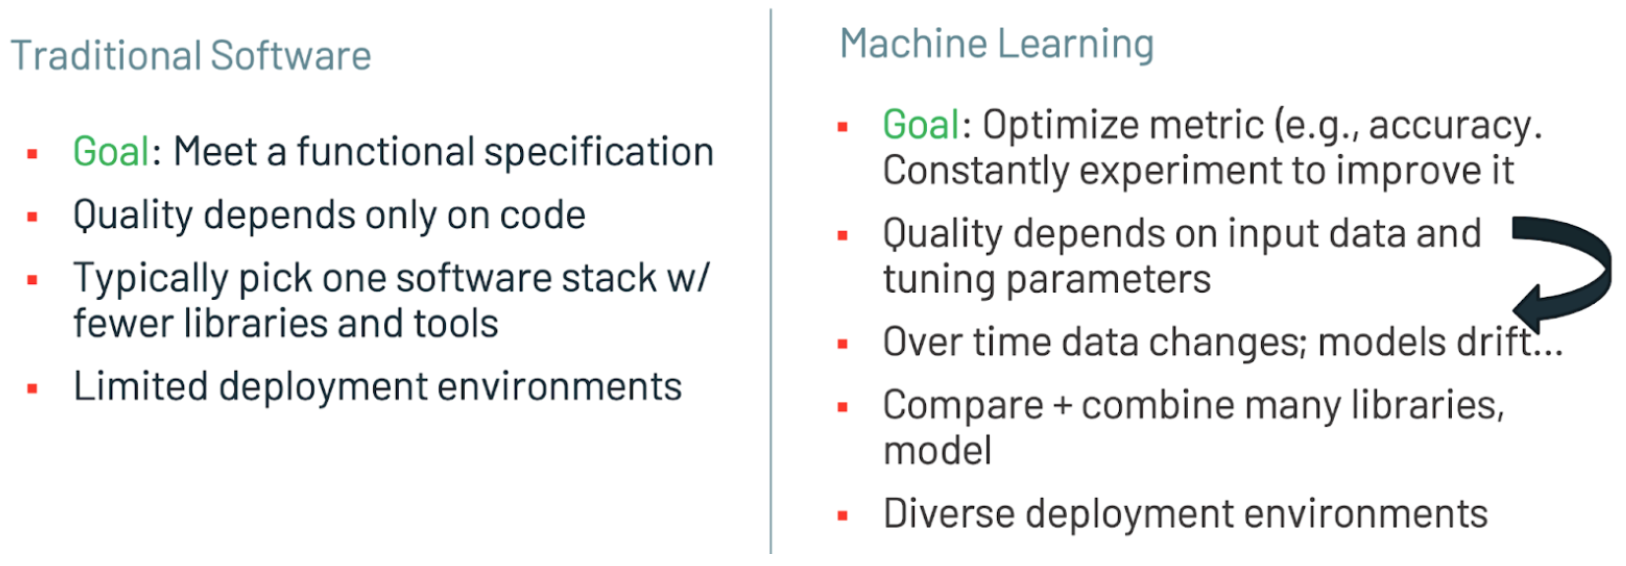 Traditional Software vs Machine Learning